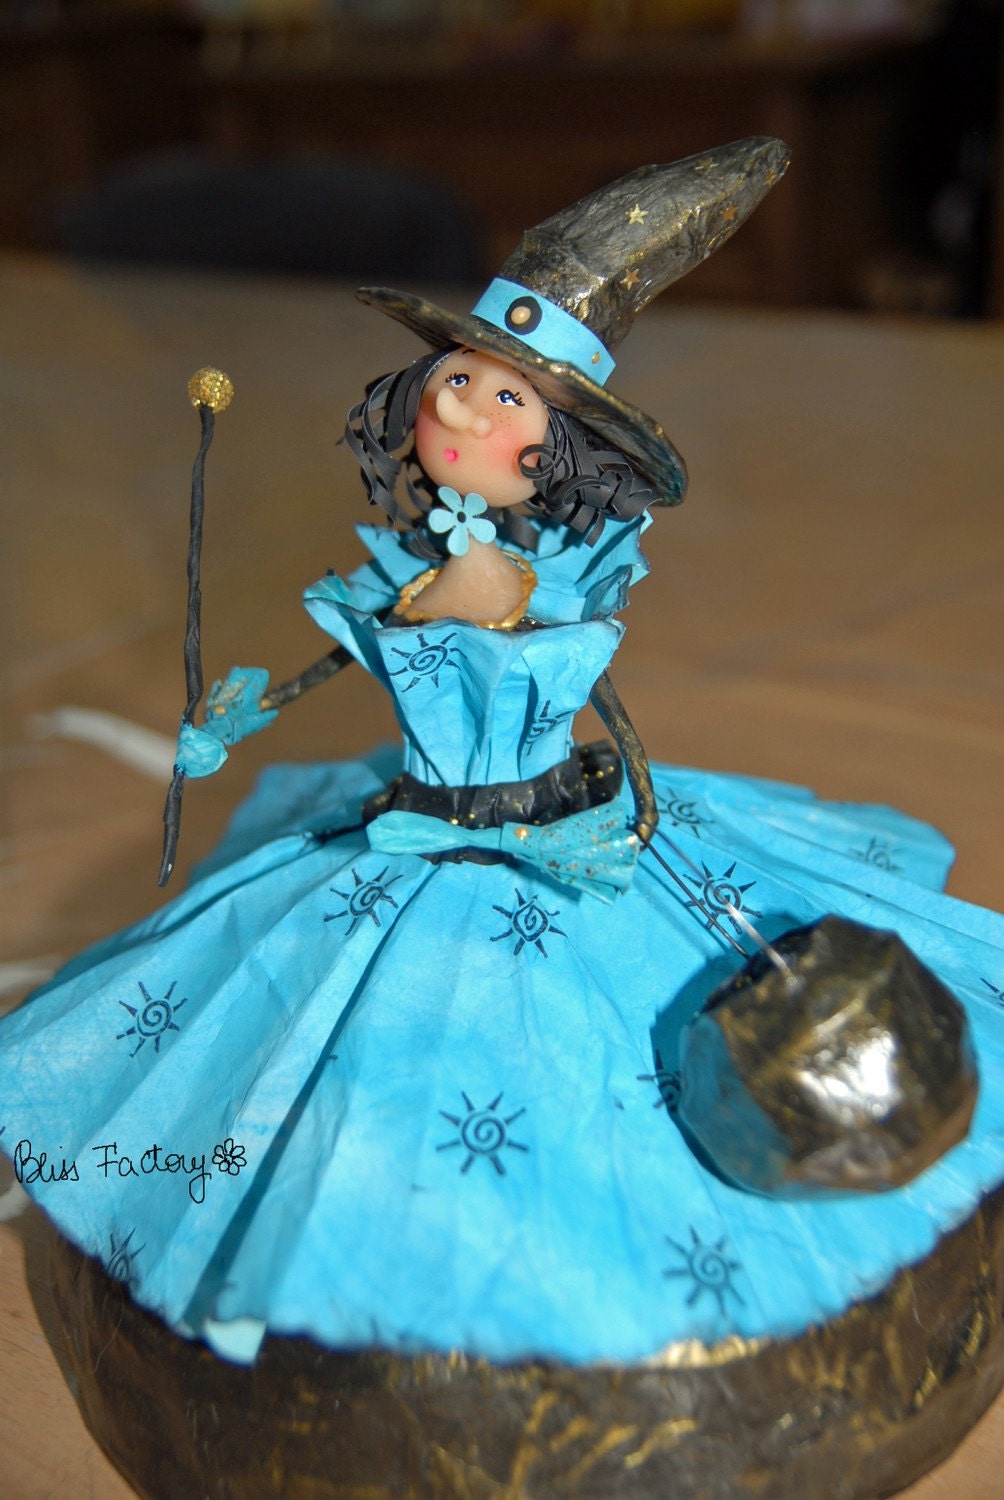 Seraphine, the blue paper witch